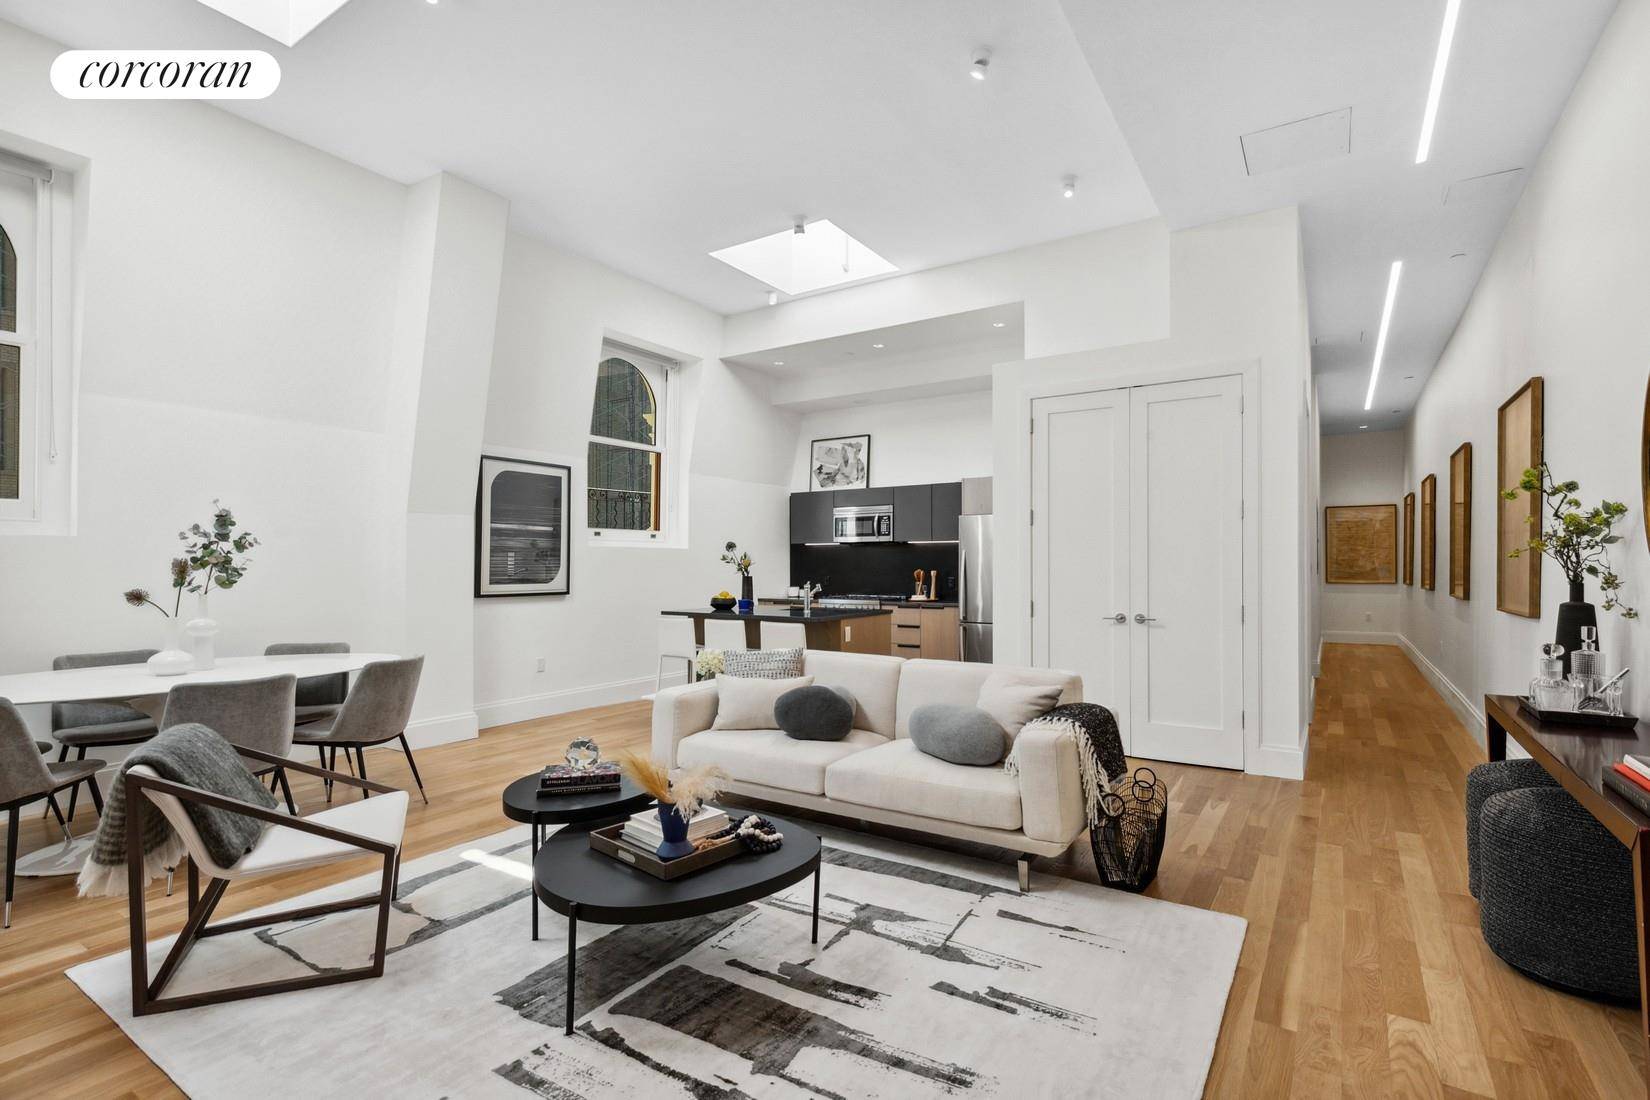 Welcome to 55 Reade, Tribeca's newest boutique rental building with occupancy in June 2022.